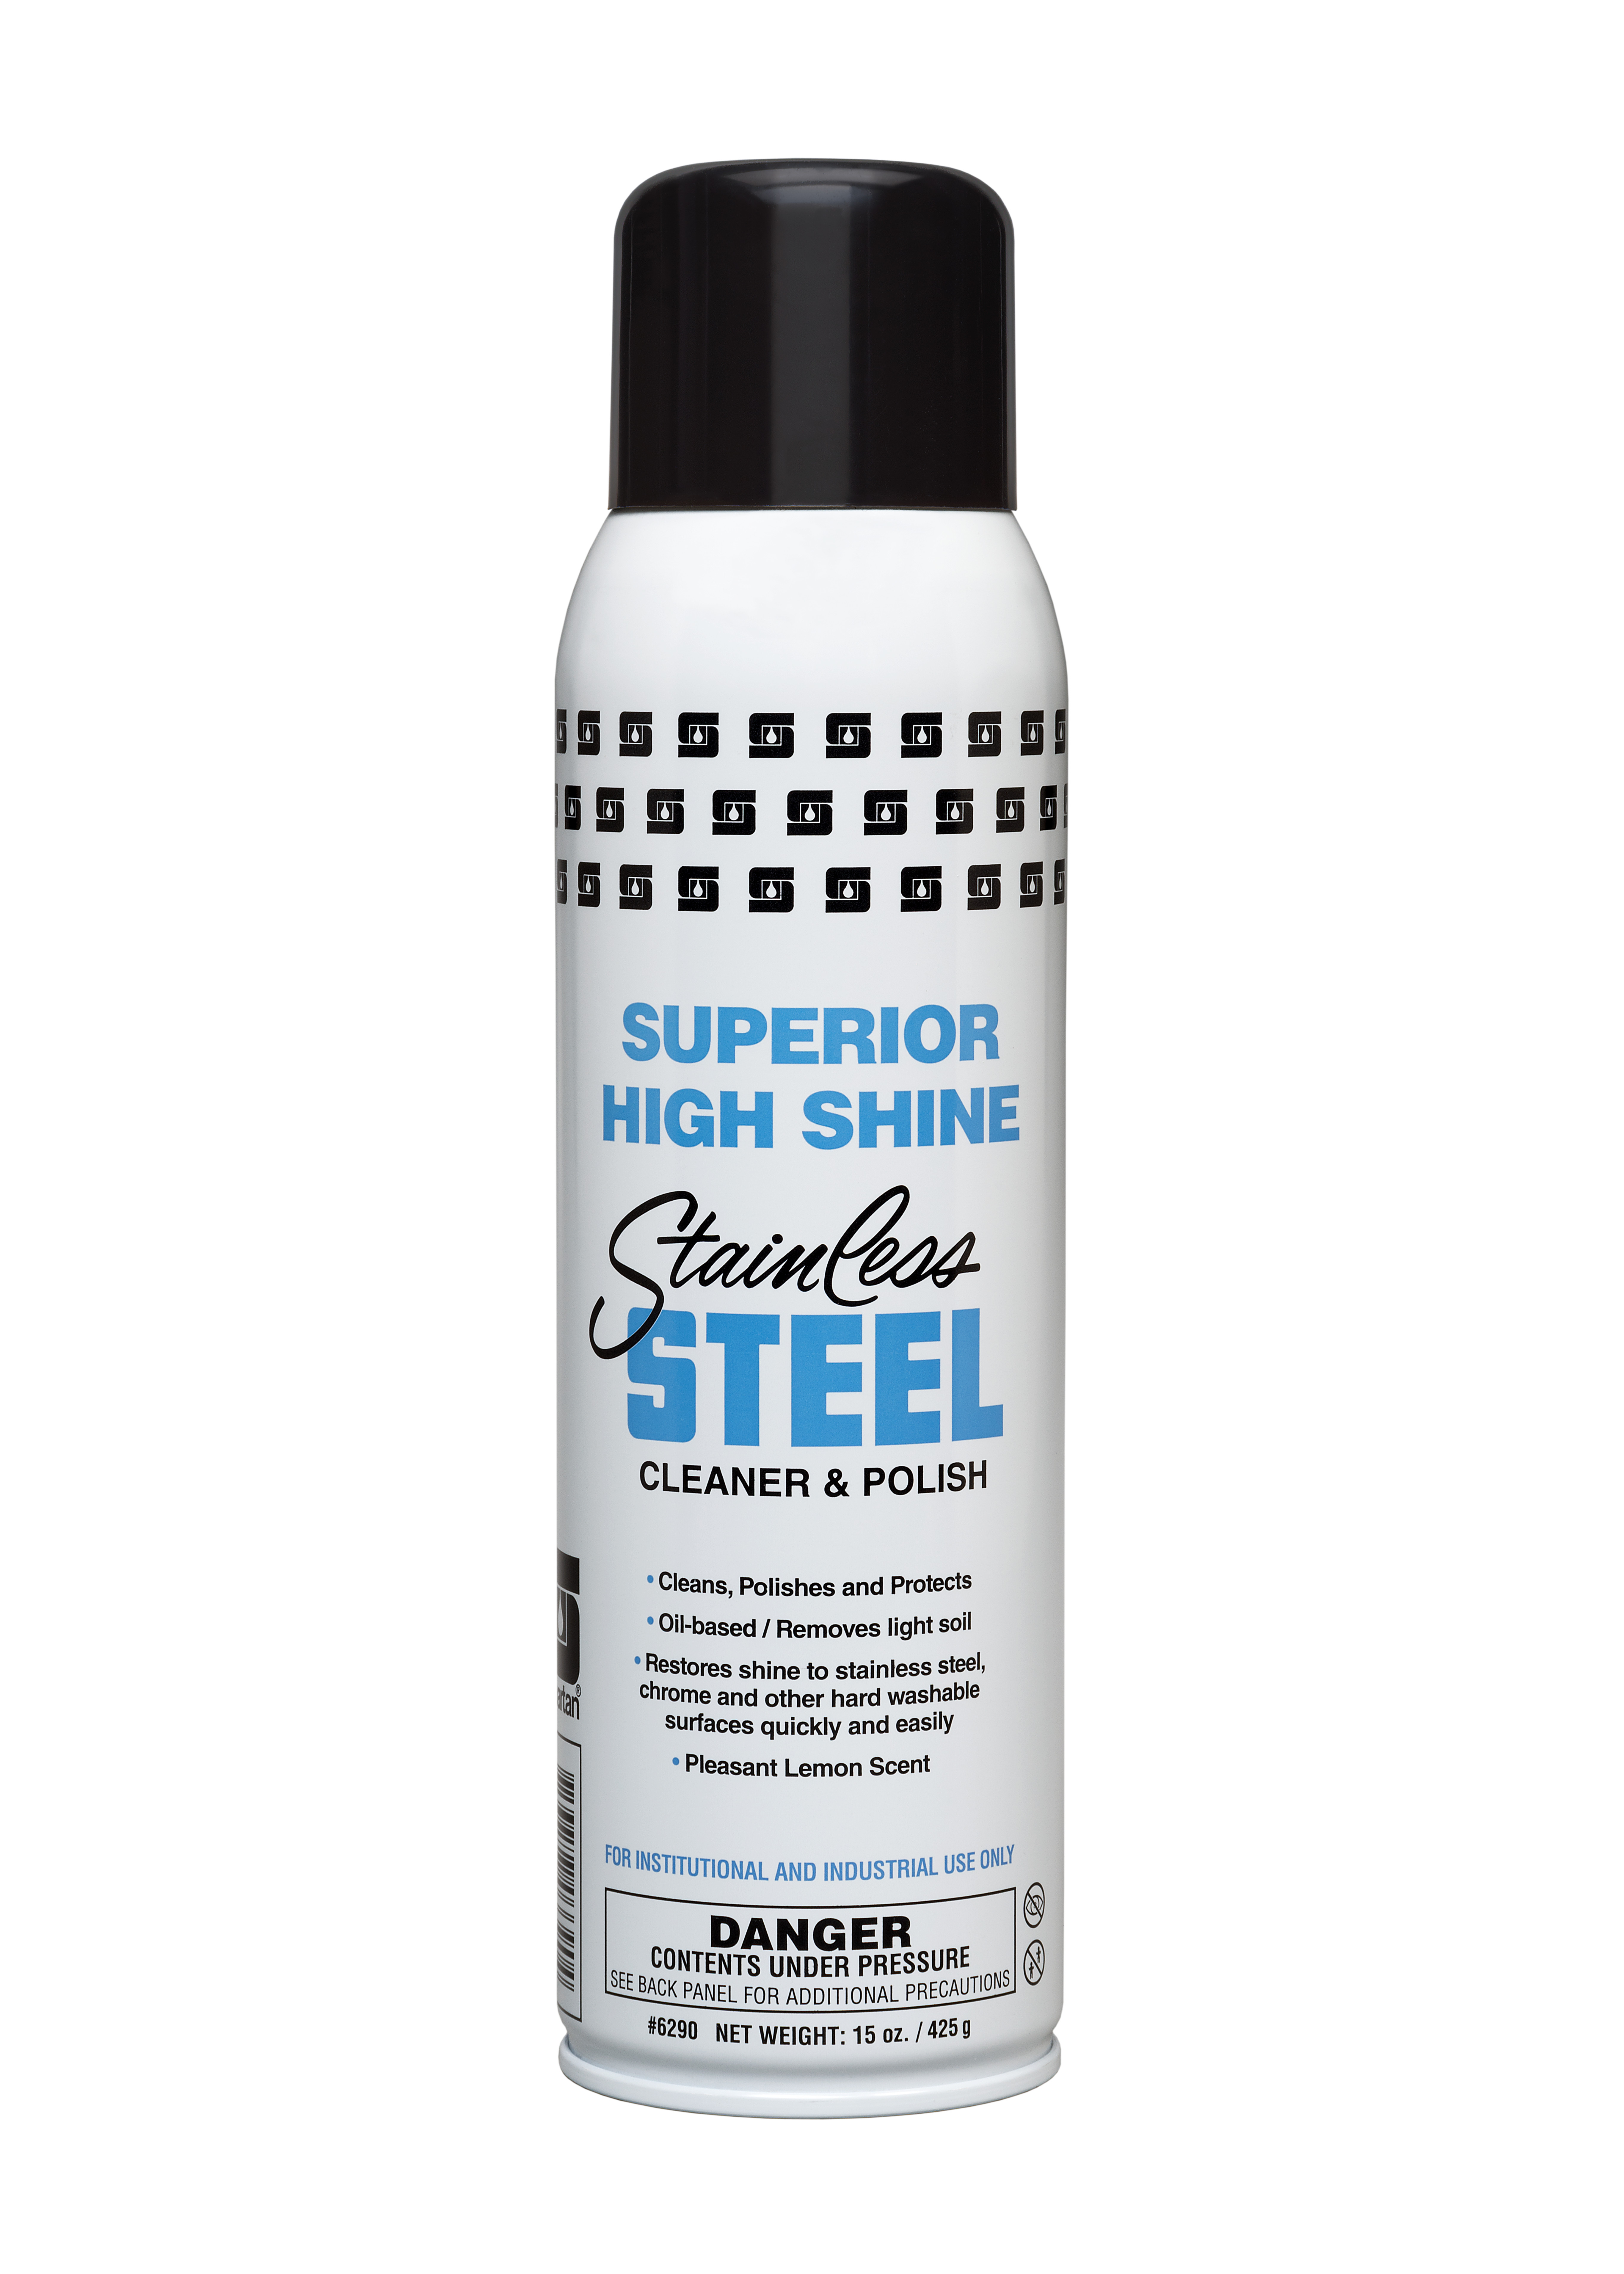 Spartan Chemical Company Superior High Shine Stainless Steel Cleaner & Polish, 12-20 OZ.CAN